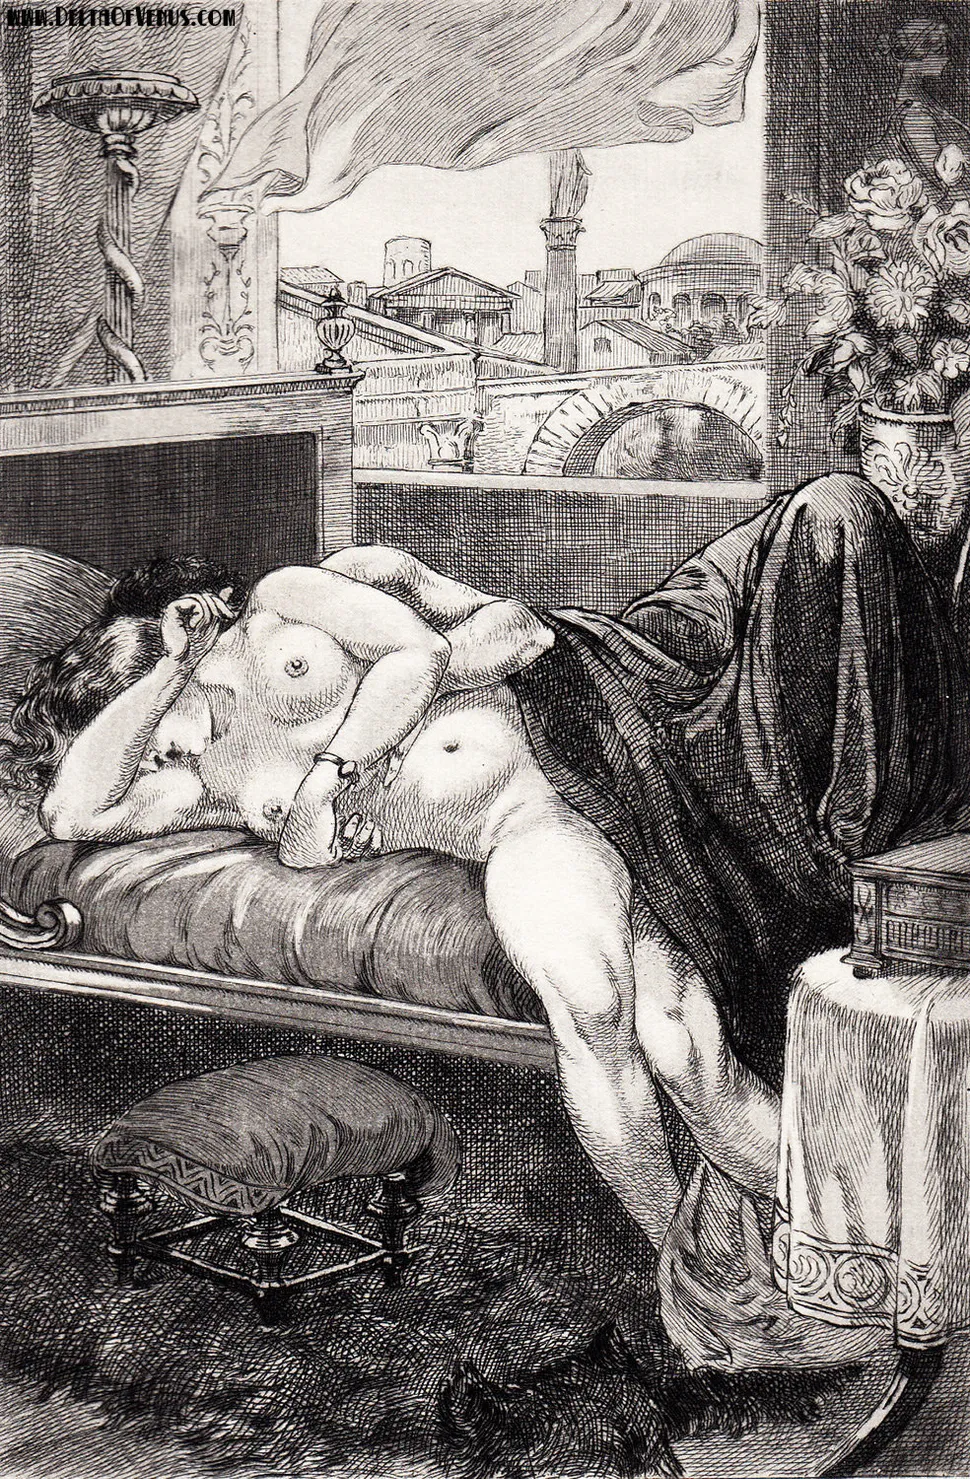 Vintage Incest Porn 1800s - Dive Into The Fantasies Of An Obscure 19th Century Erotic Illustrator  (NSFW) | HuffPost Entertainment